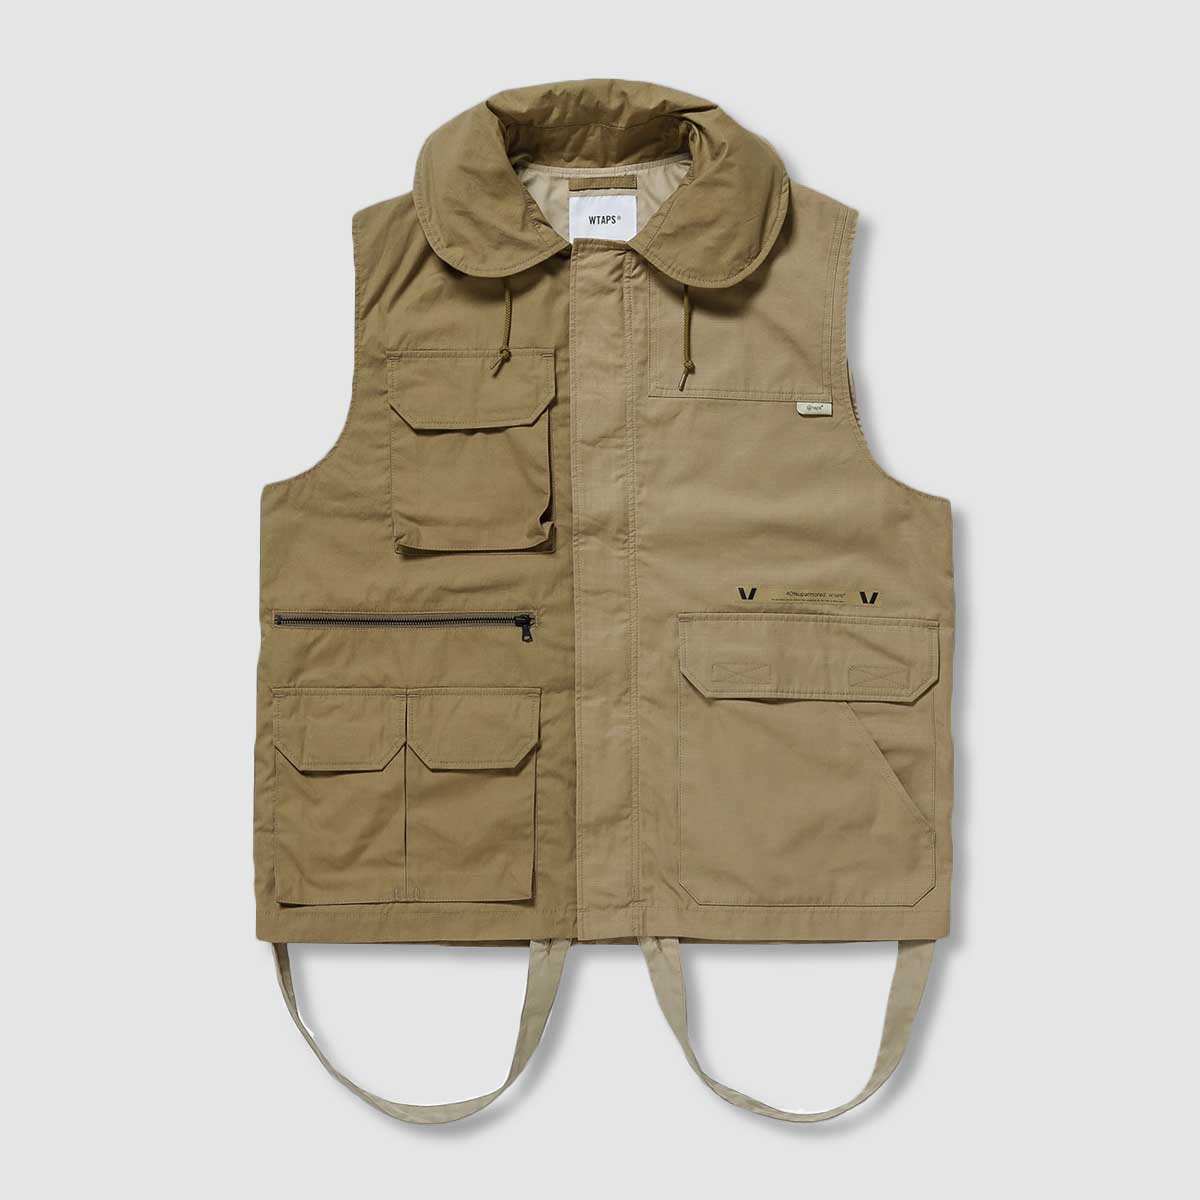 INVINCIBLE - TRADER / VEST / COTTON. WEATHER. RIPSTOP